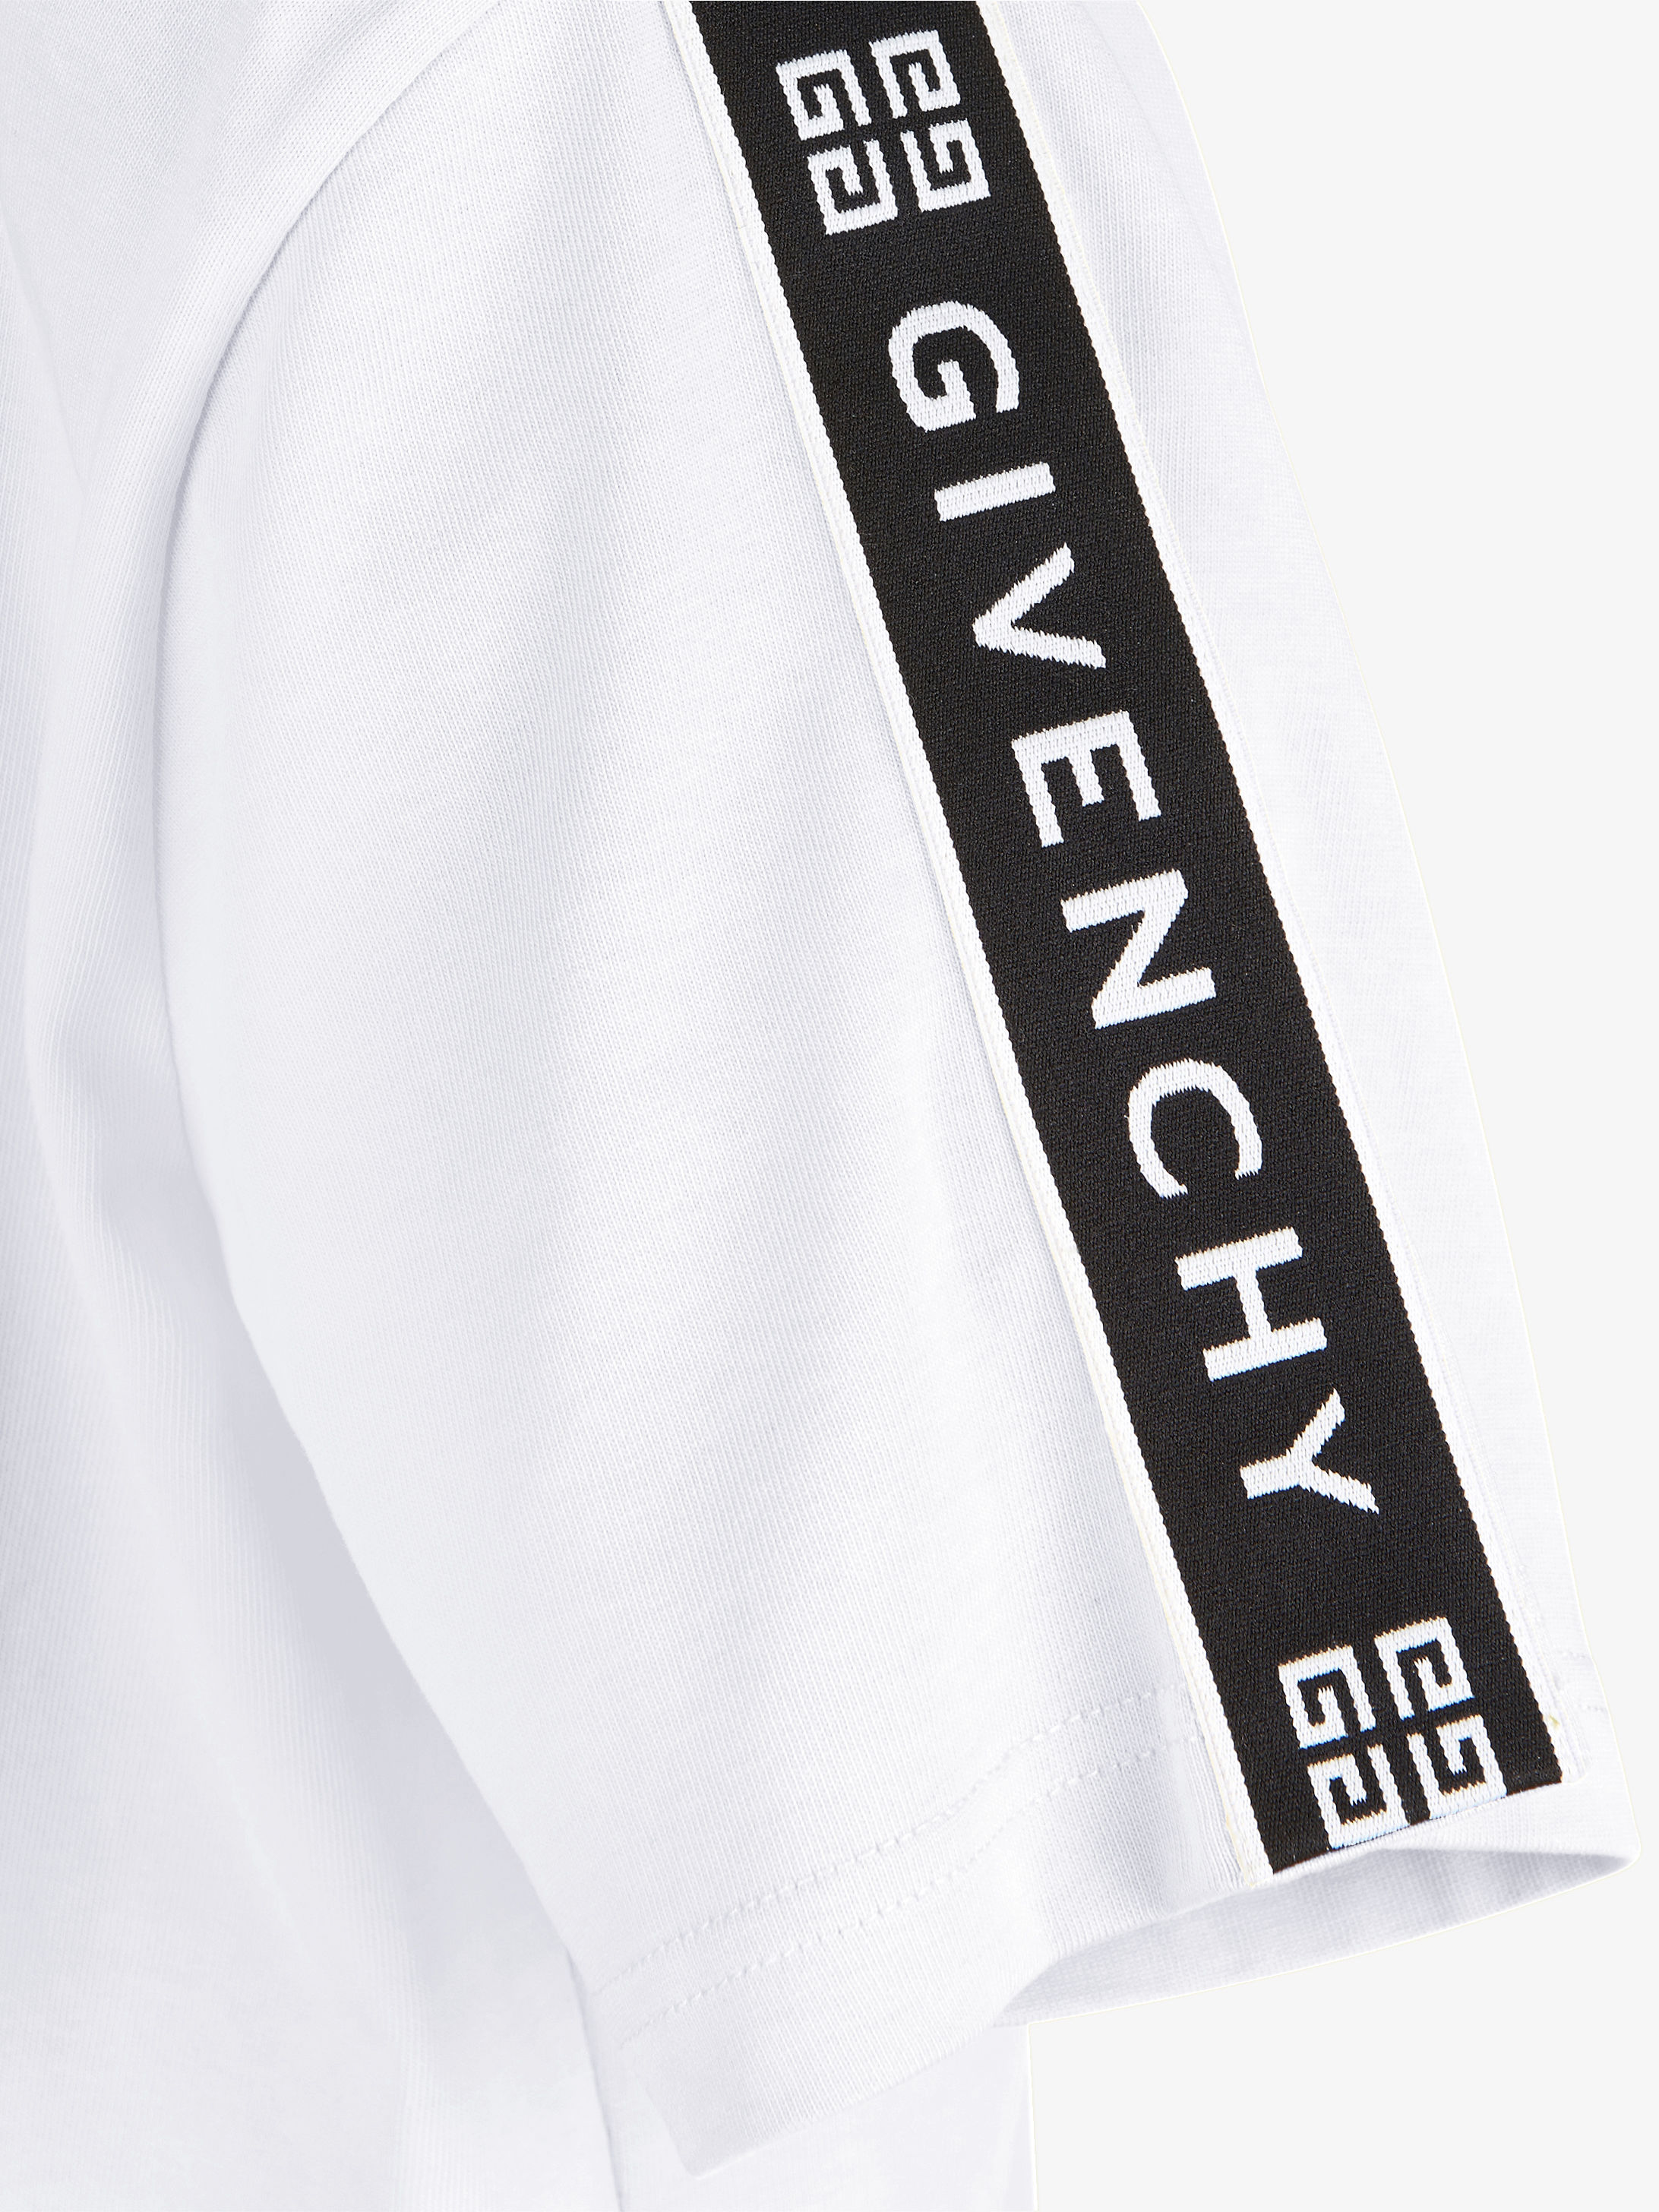 Givenchy White Tape T-Shirt - Rogue